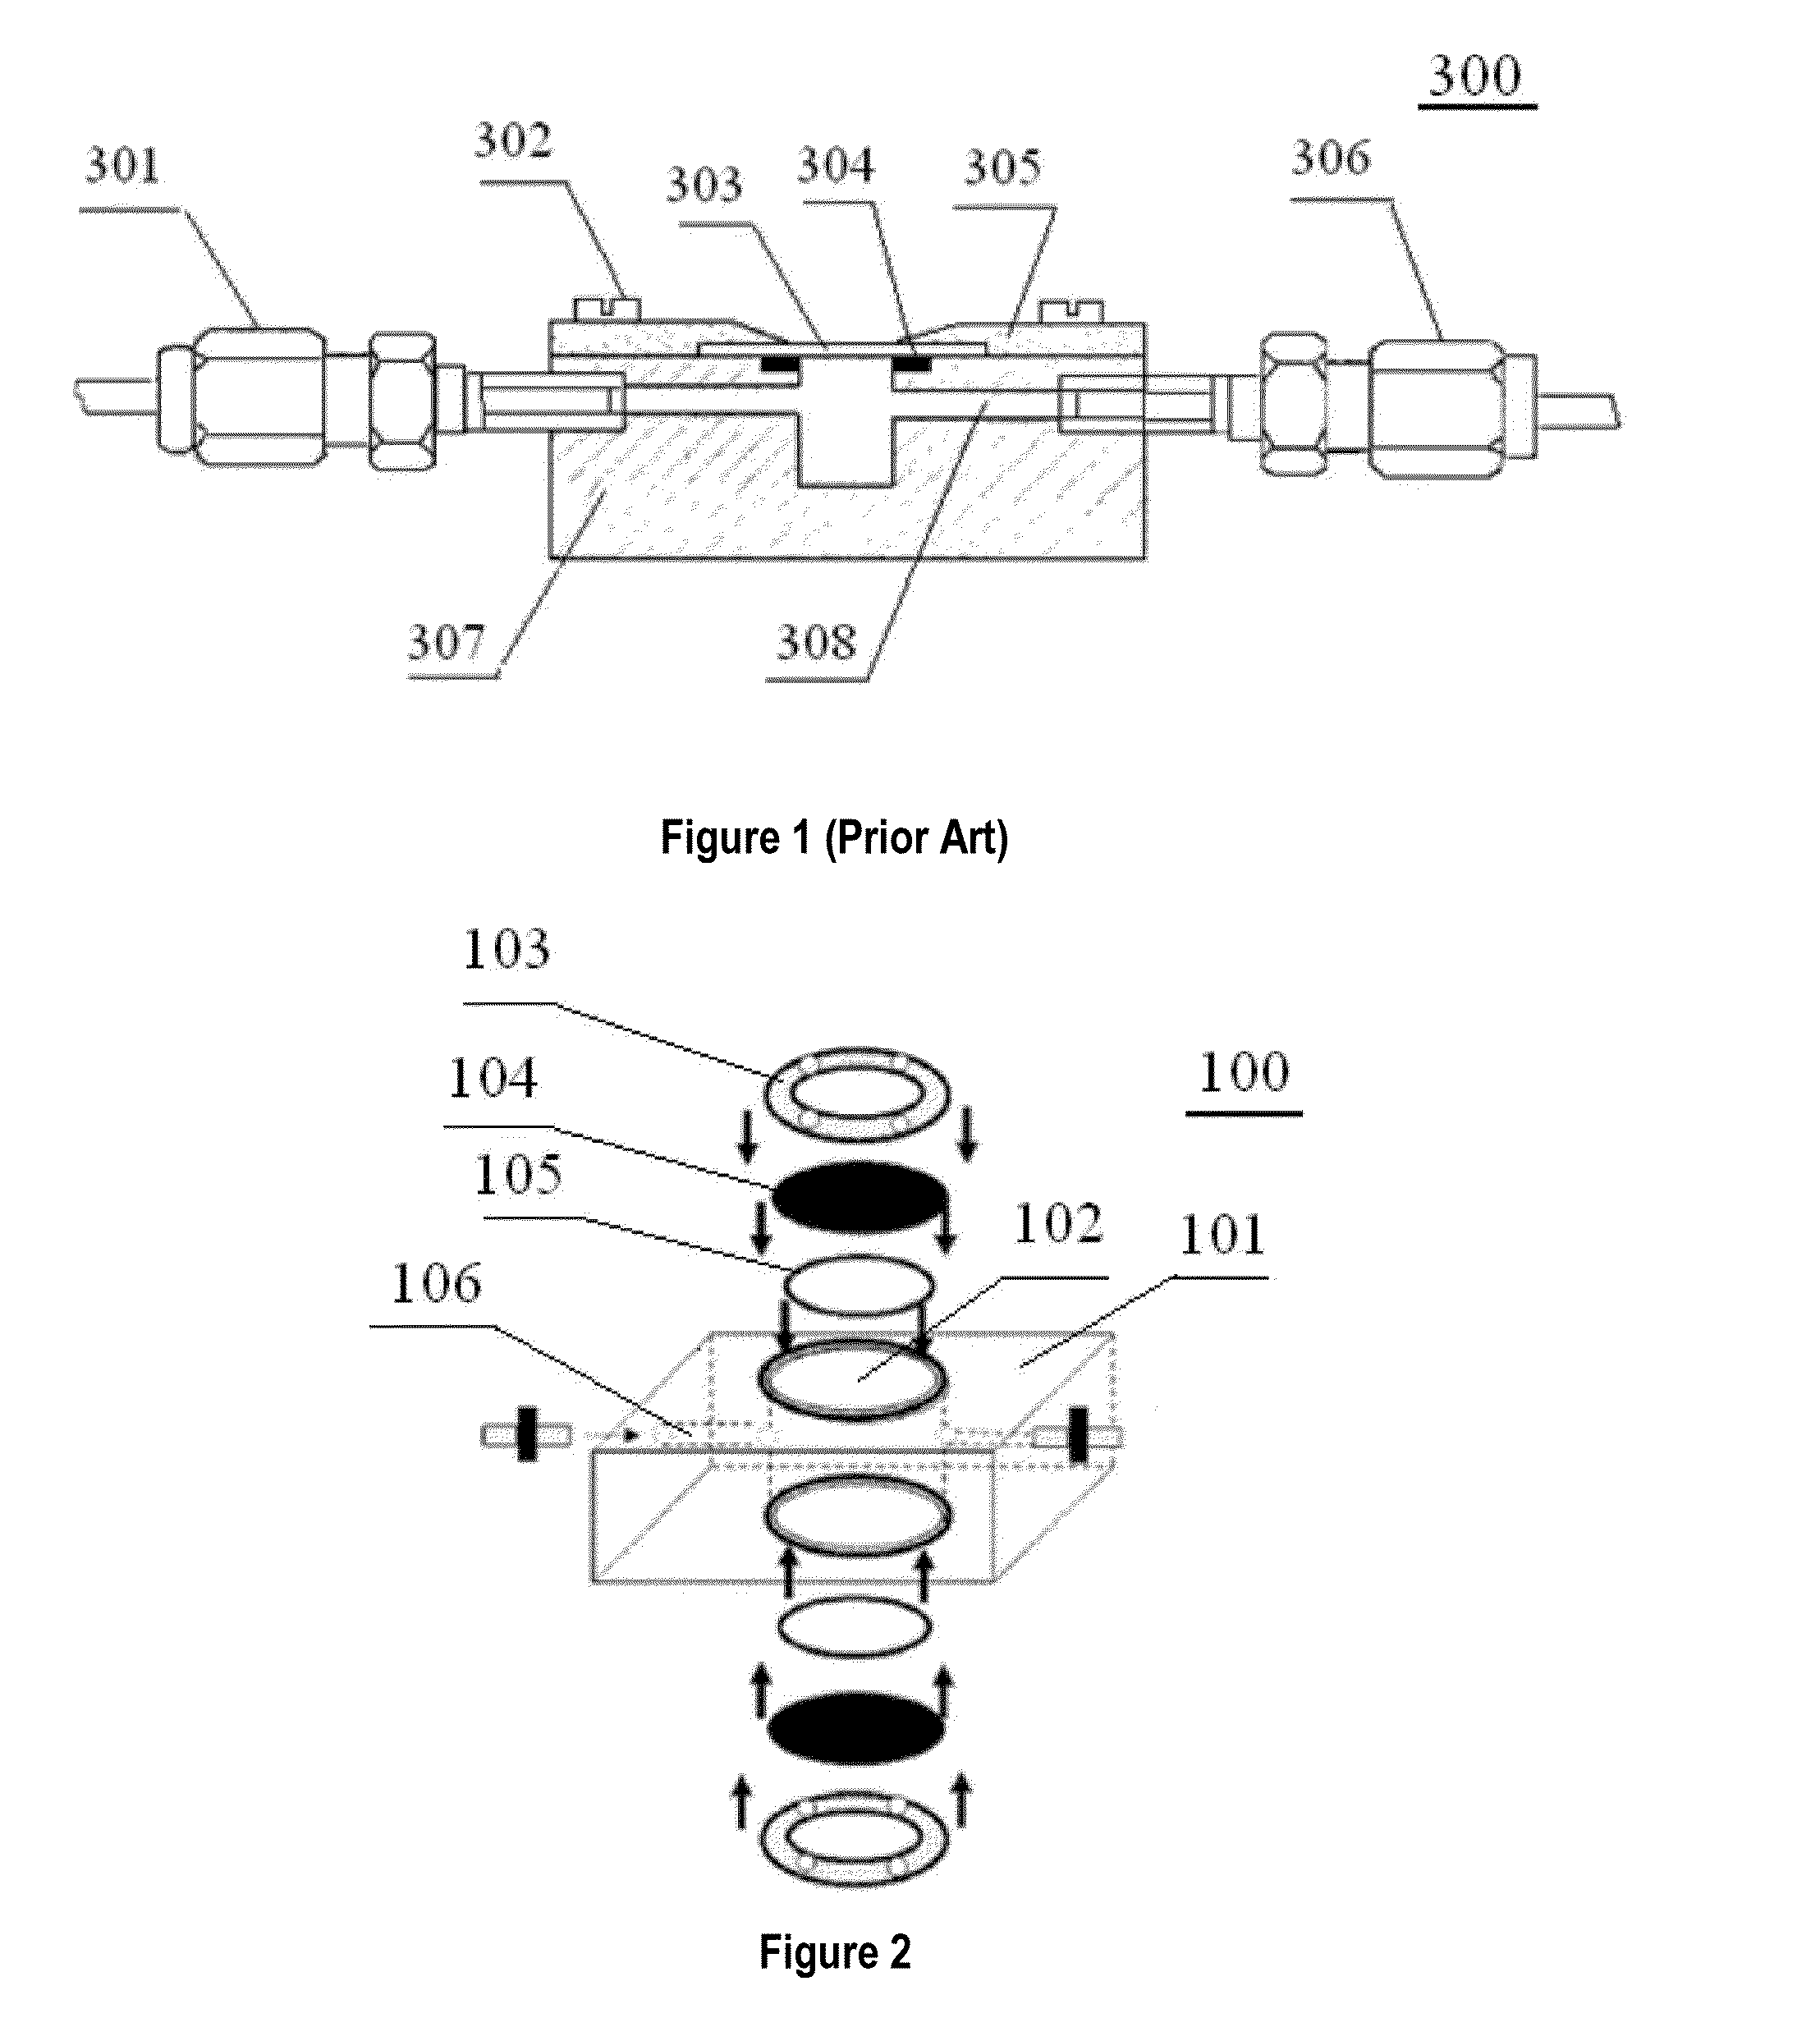 Sample chamber for laser ablation analysis of fluid inclusions and analyzing device thereof